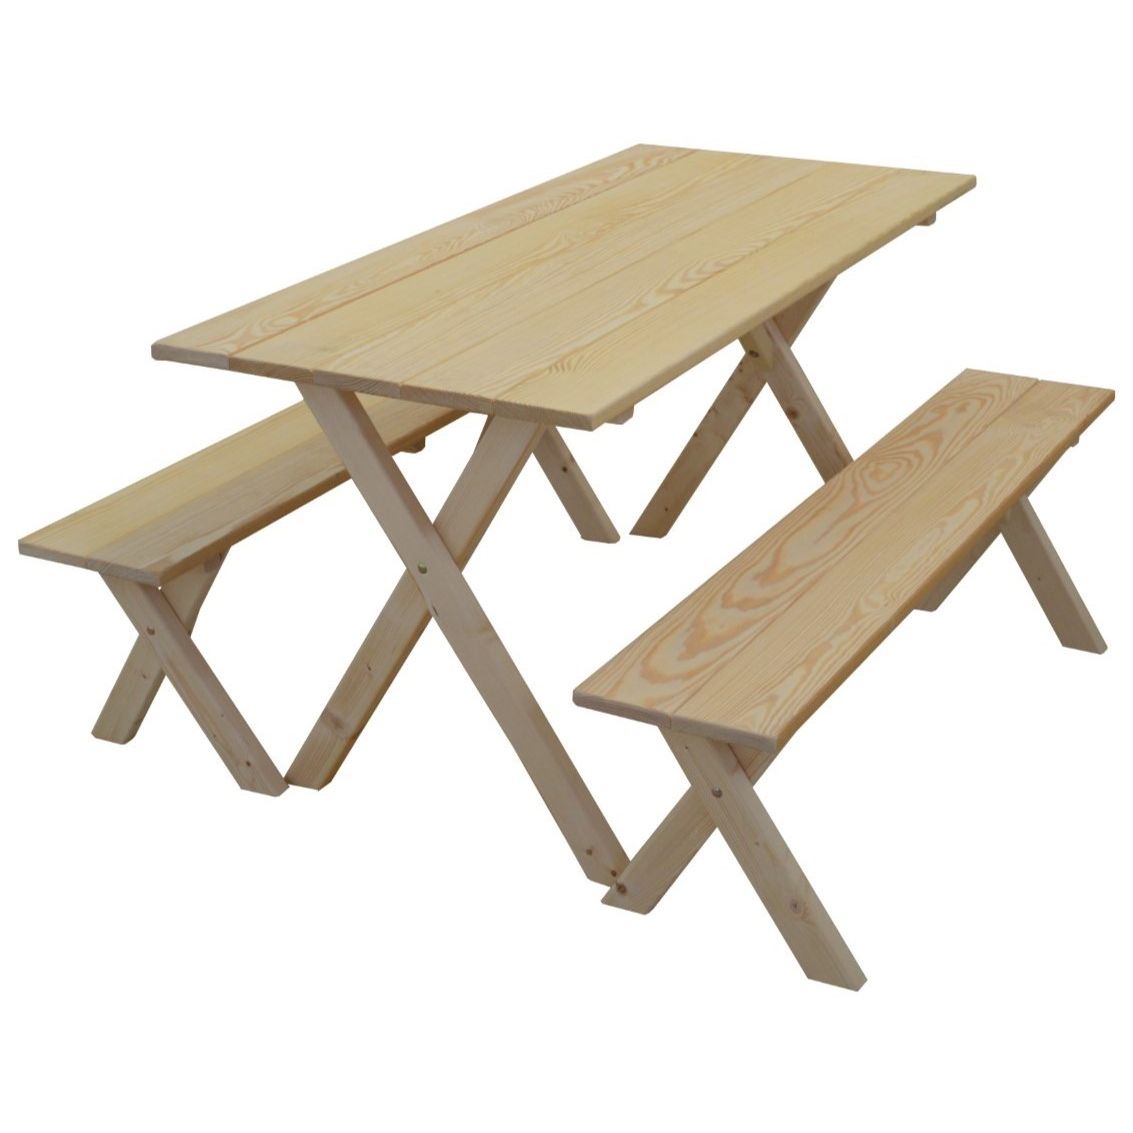 Pine Economy Picnic Table with Two Detached Benches